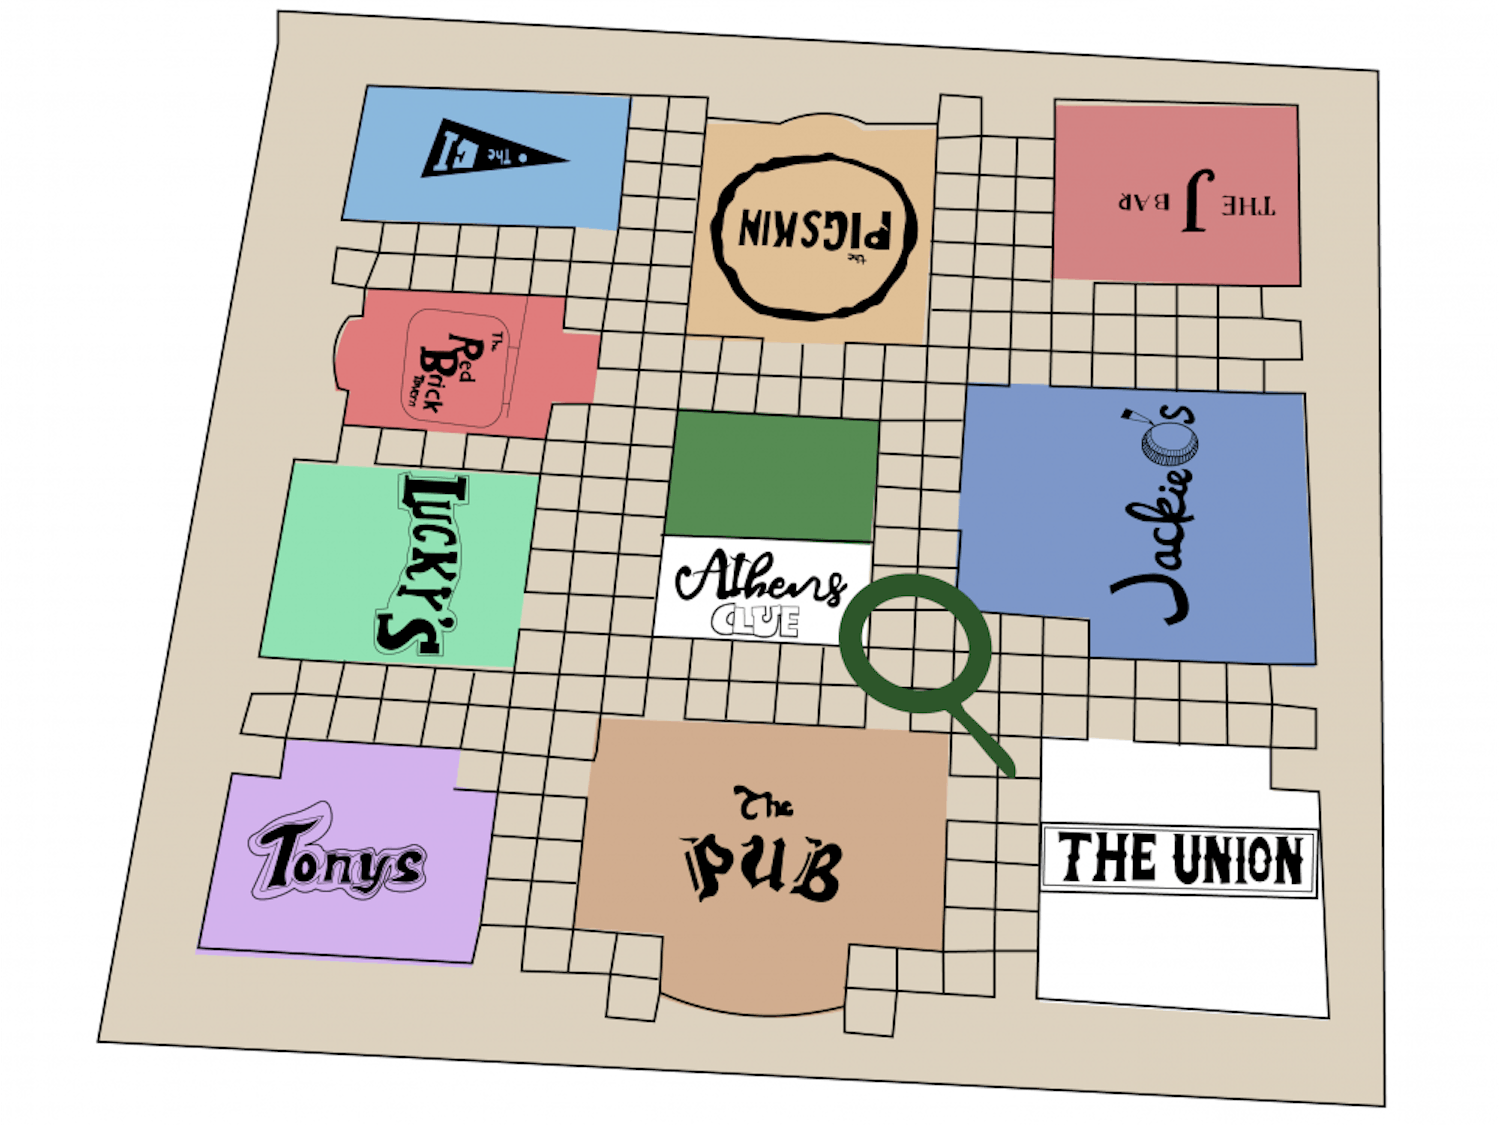 athensboardgame-01.png